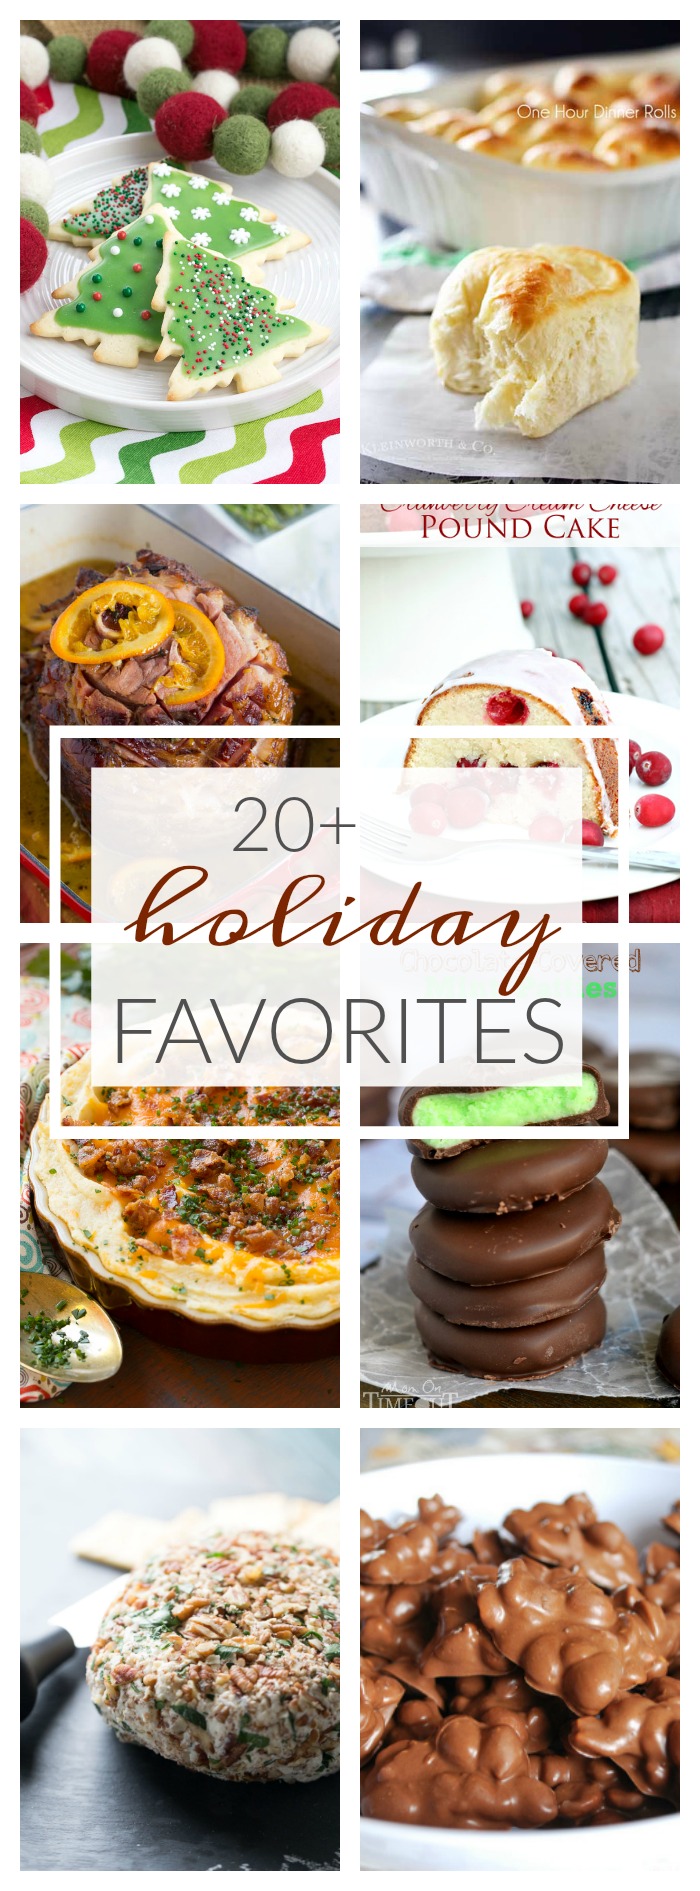 20 Favorite Holiday Recipes